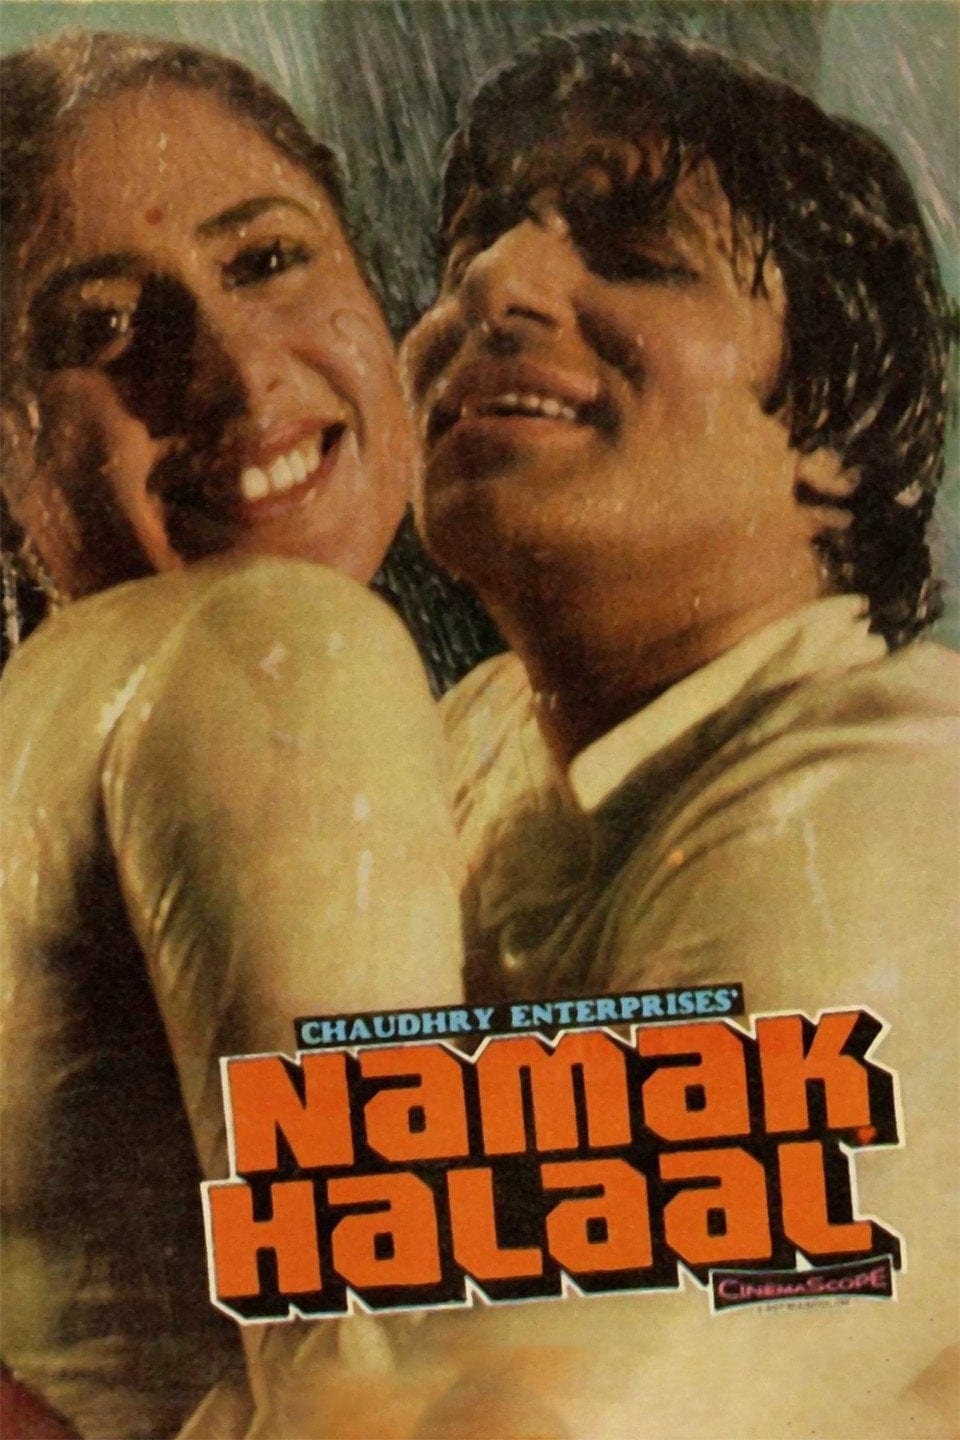 Poster for the movie "Namak Halaal"